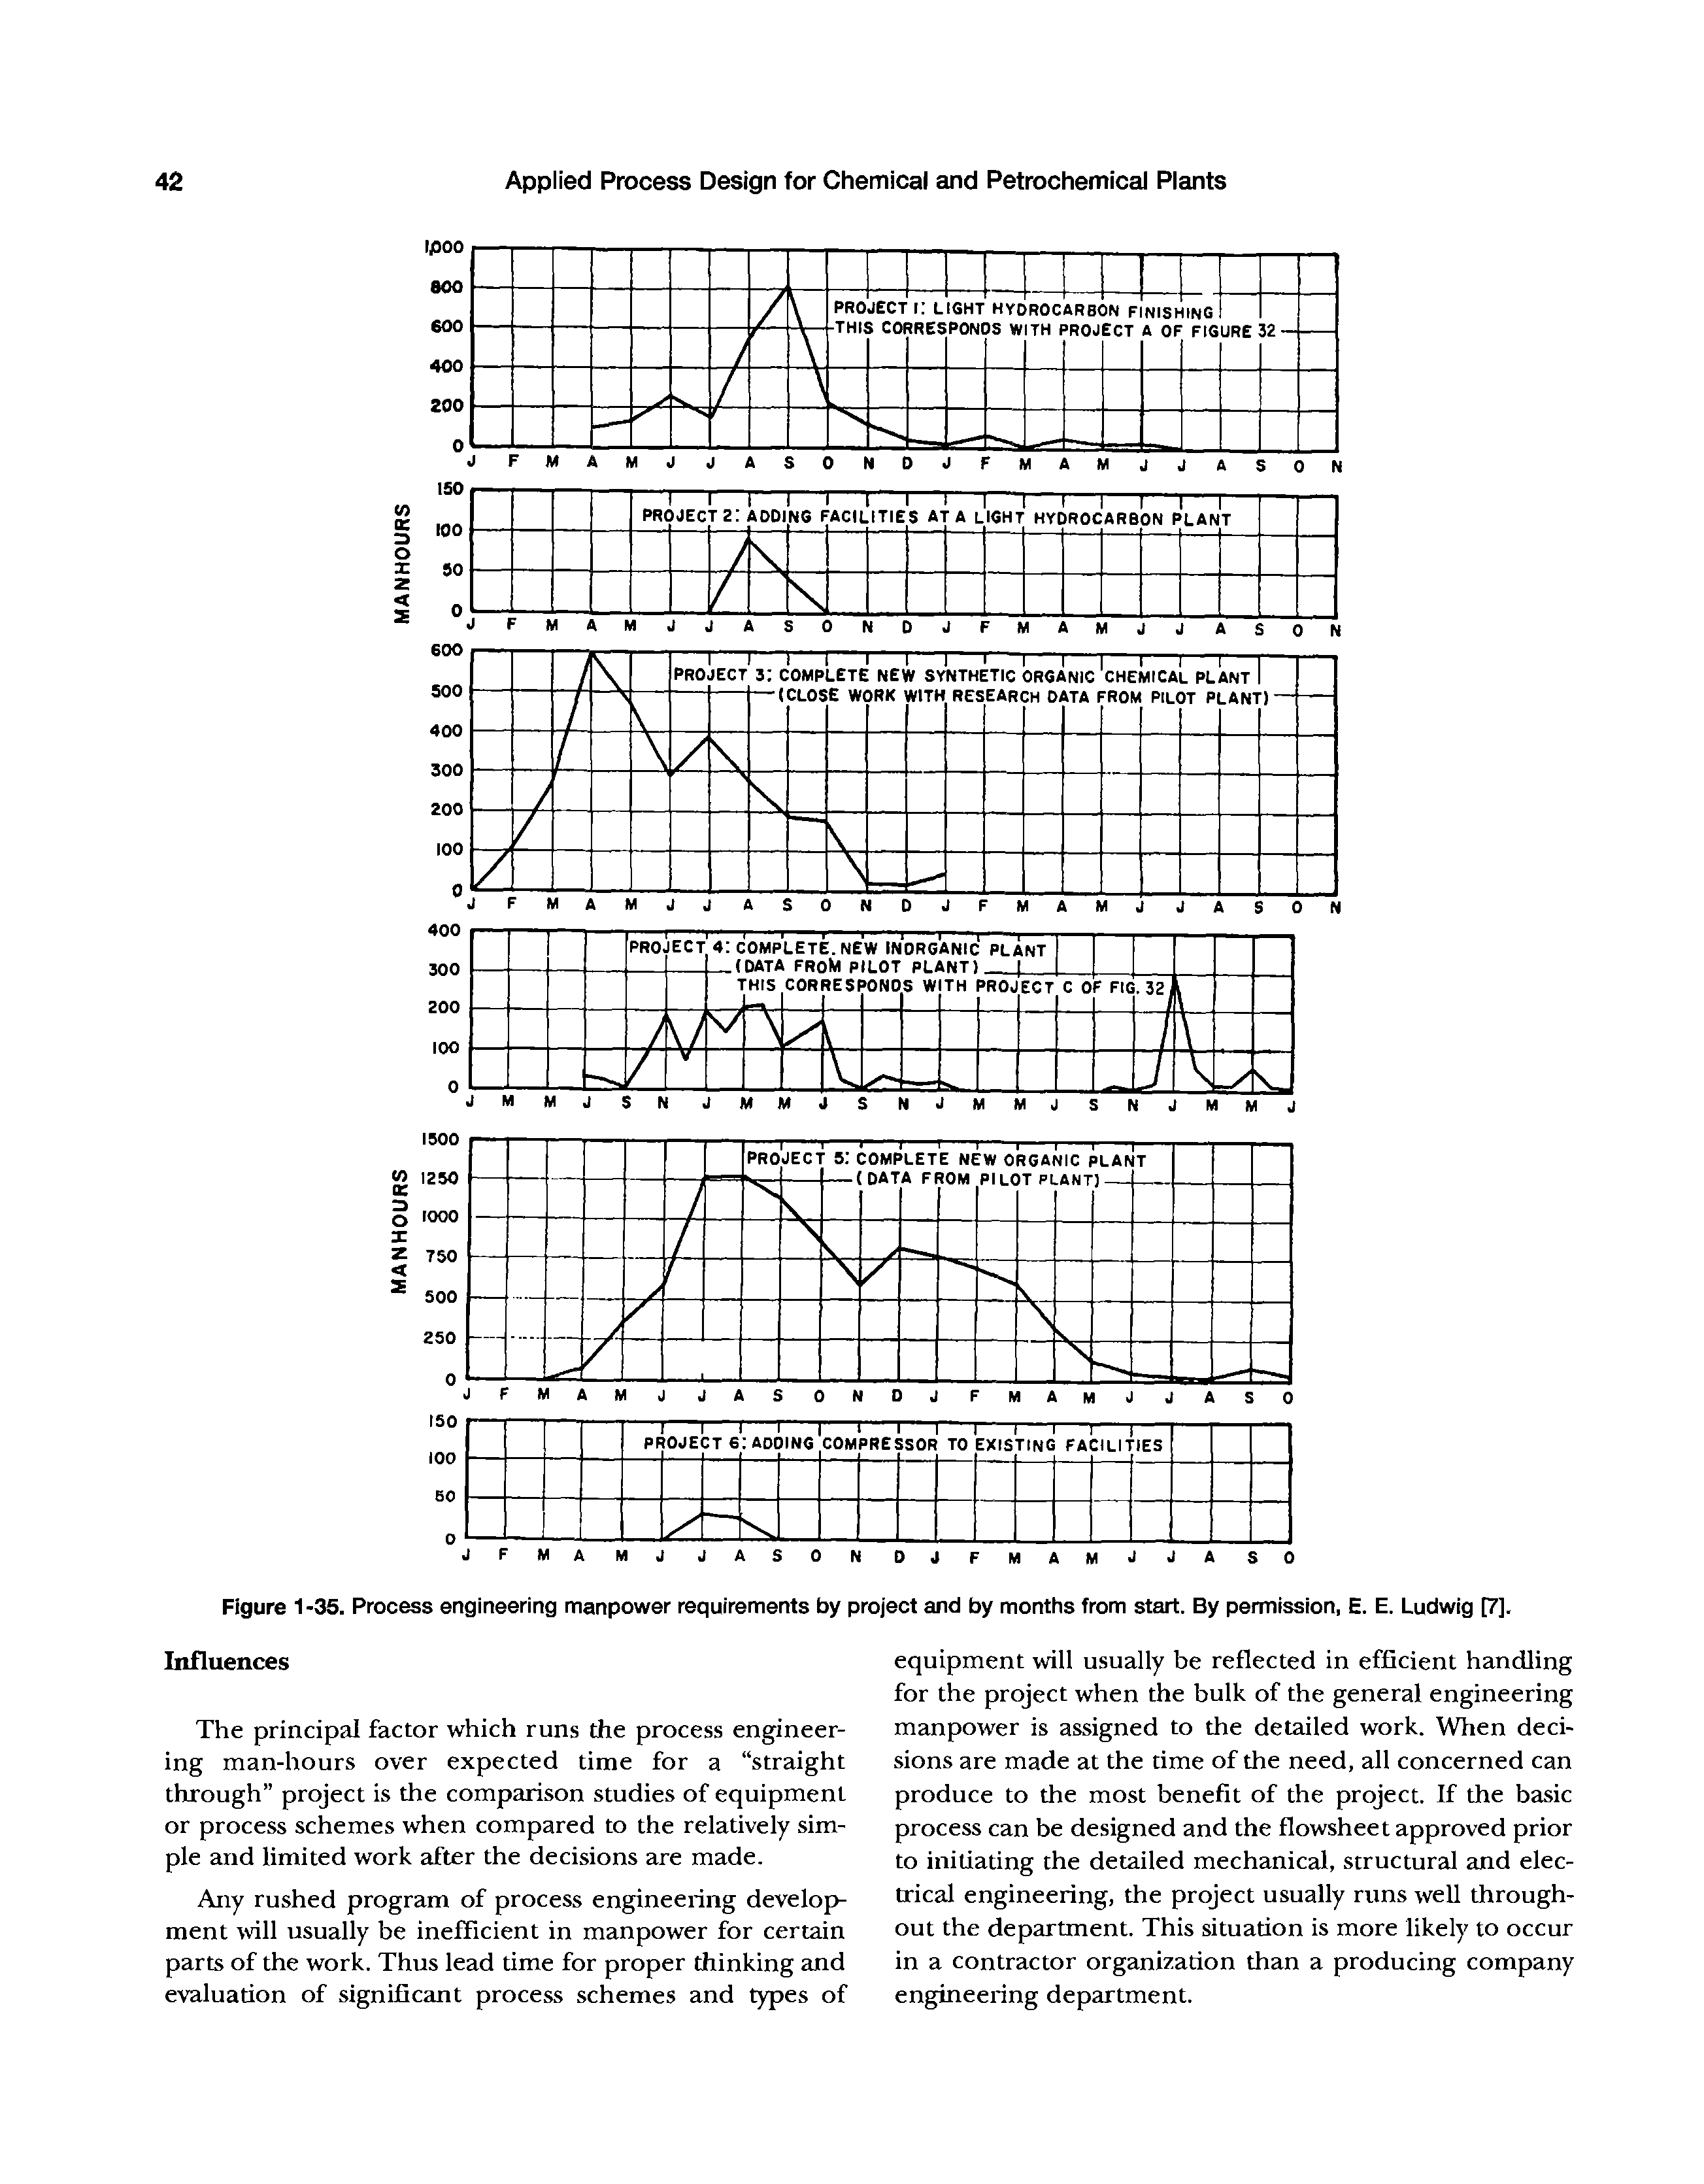 Figure 1-35. Process engineering manpower requirements by project and by months from start. By permission, E. E. Ludwig [7], Influences...